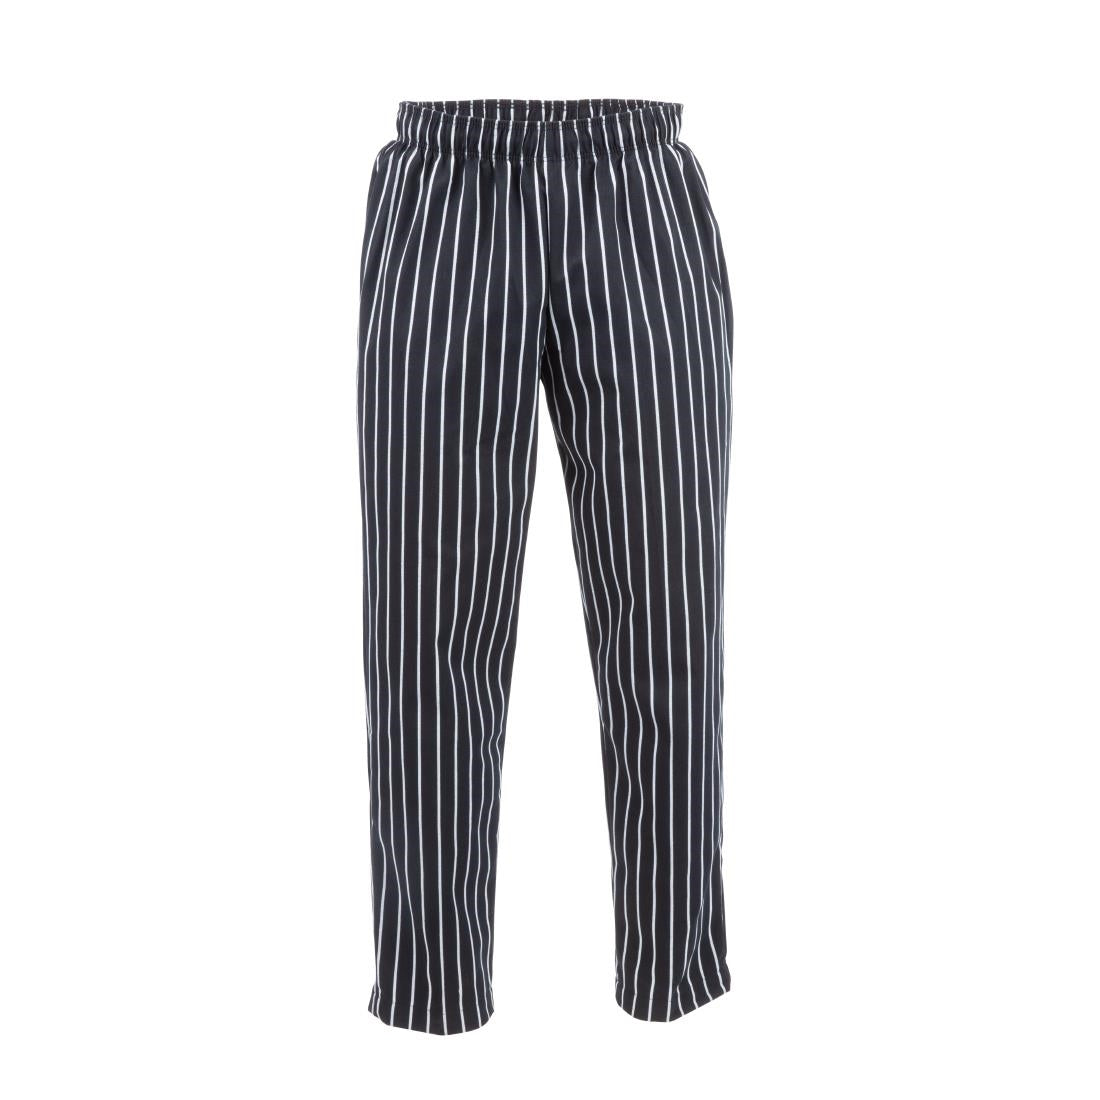 A940-4XL Chef Works Designer Baggy Pant Chalk Stripe 4XL JD Catering Equipment Solutions Ltd